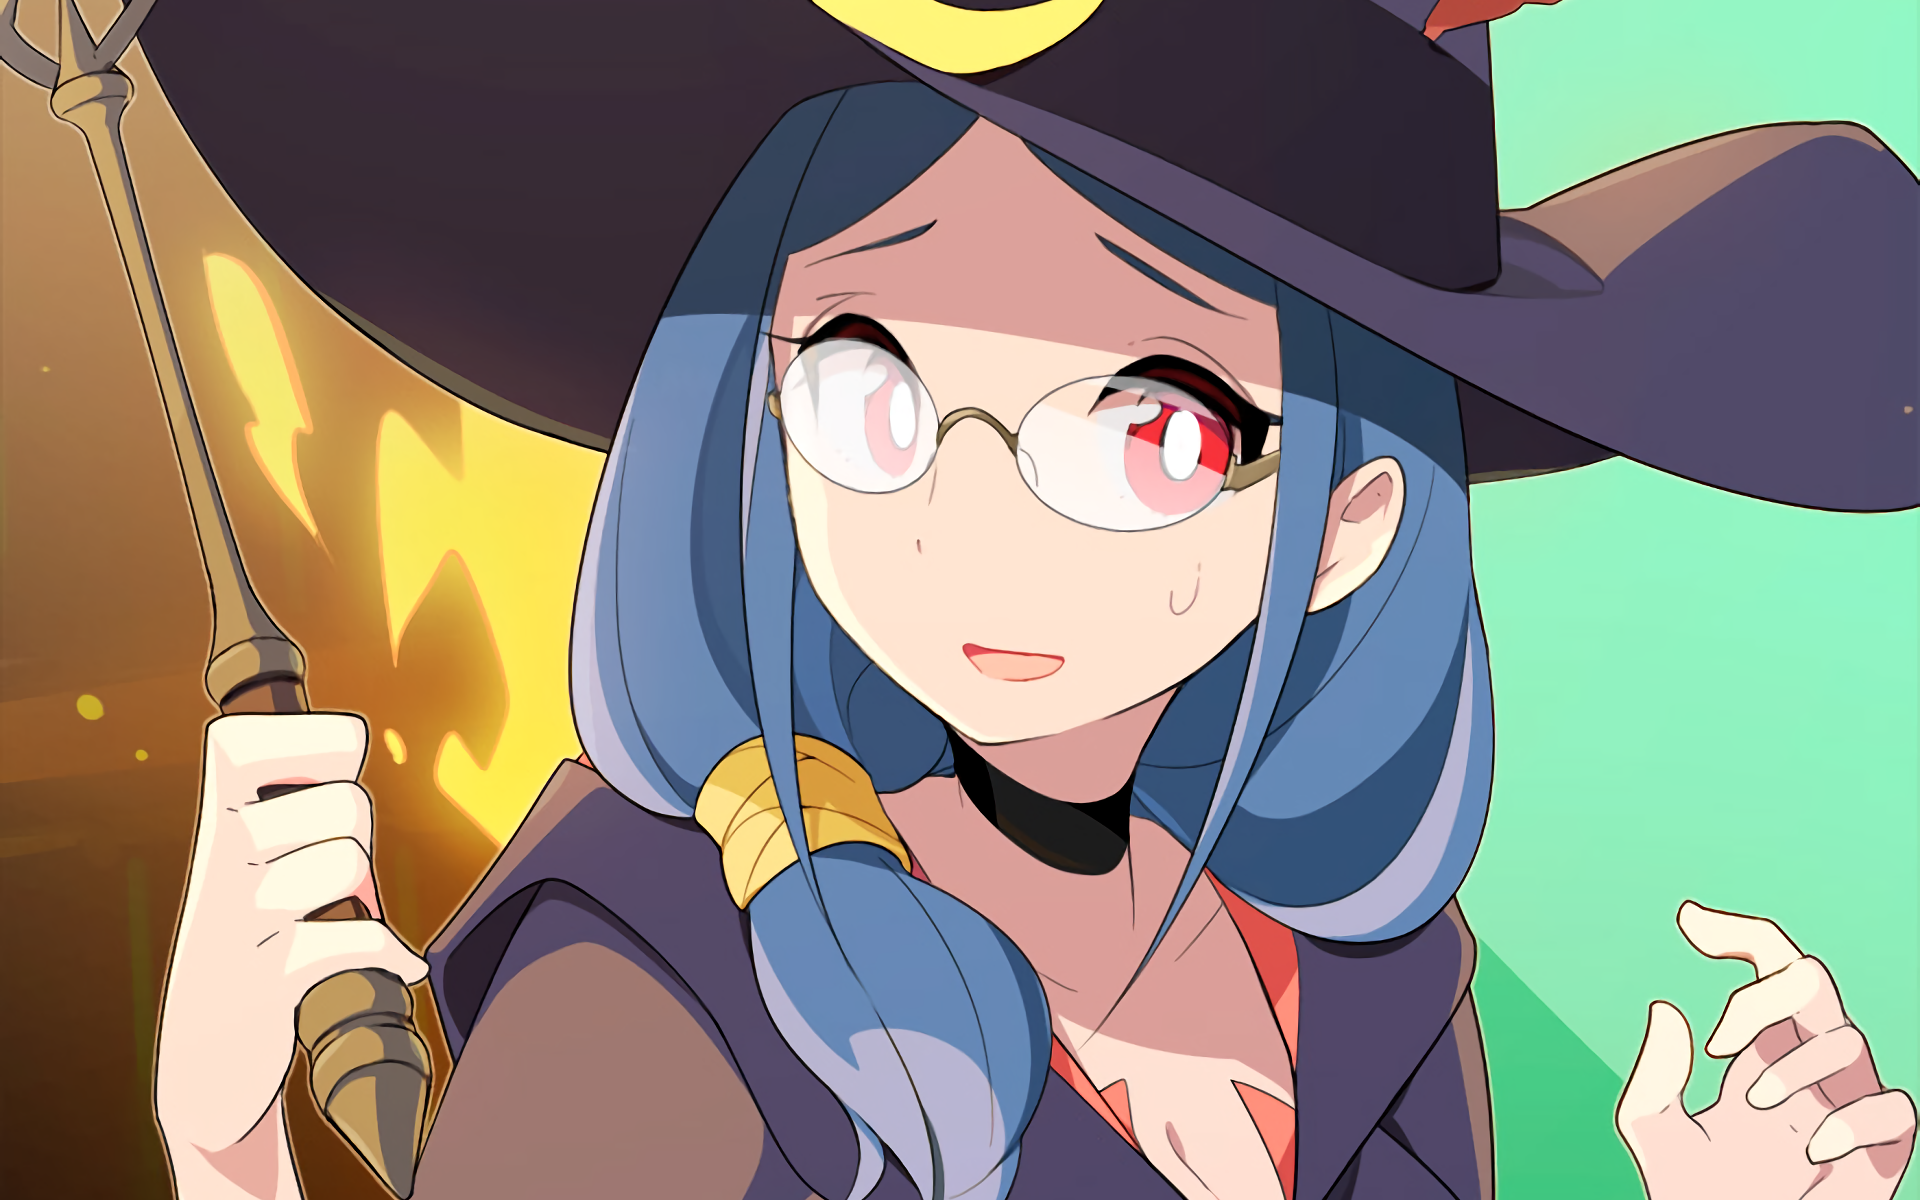 Little Witch Academia 4k Ultra HD Wallpaper | Background 